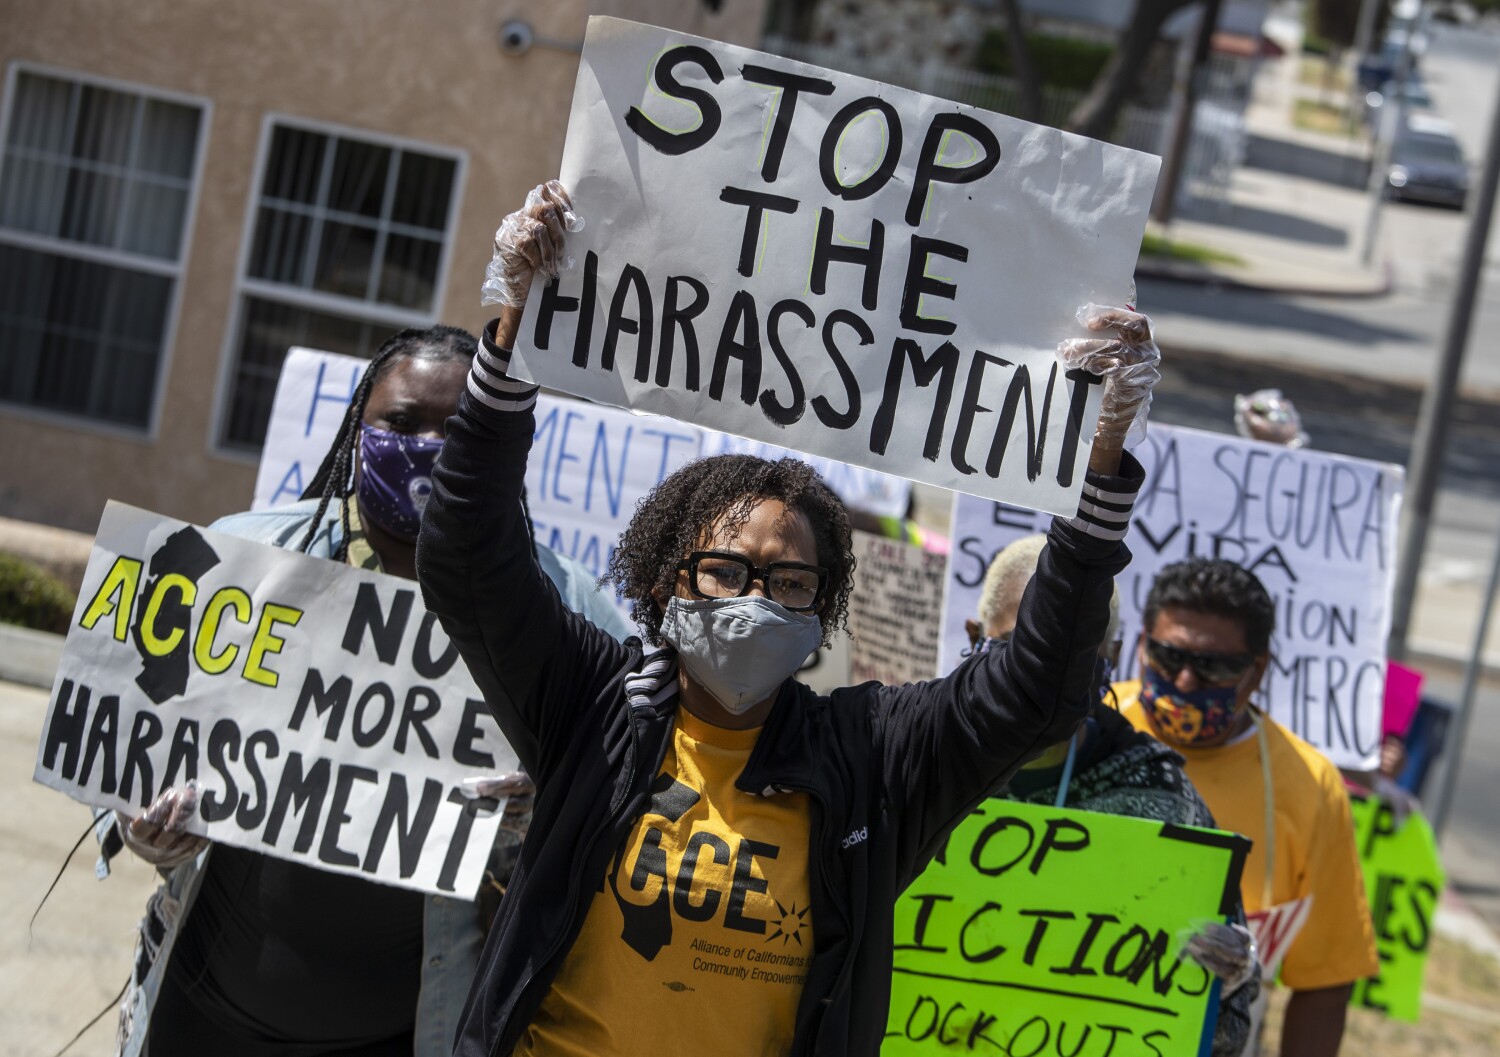 L.A. is poised to ban tenant harassment. Here's what the proposed law covers